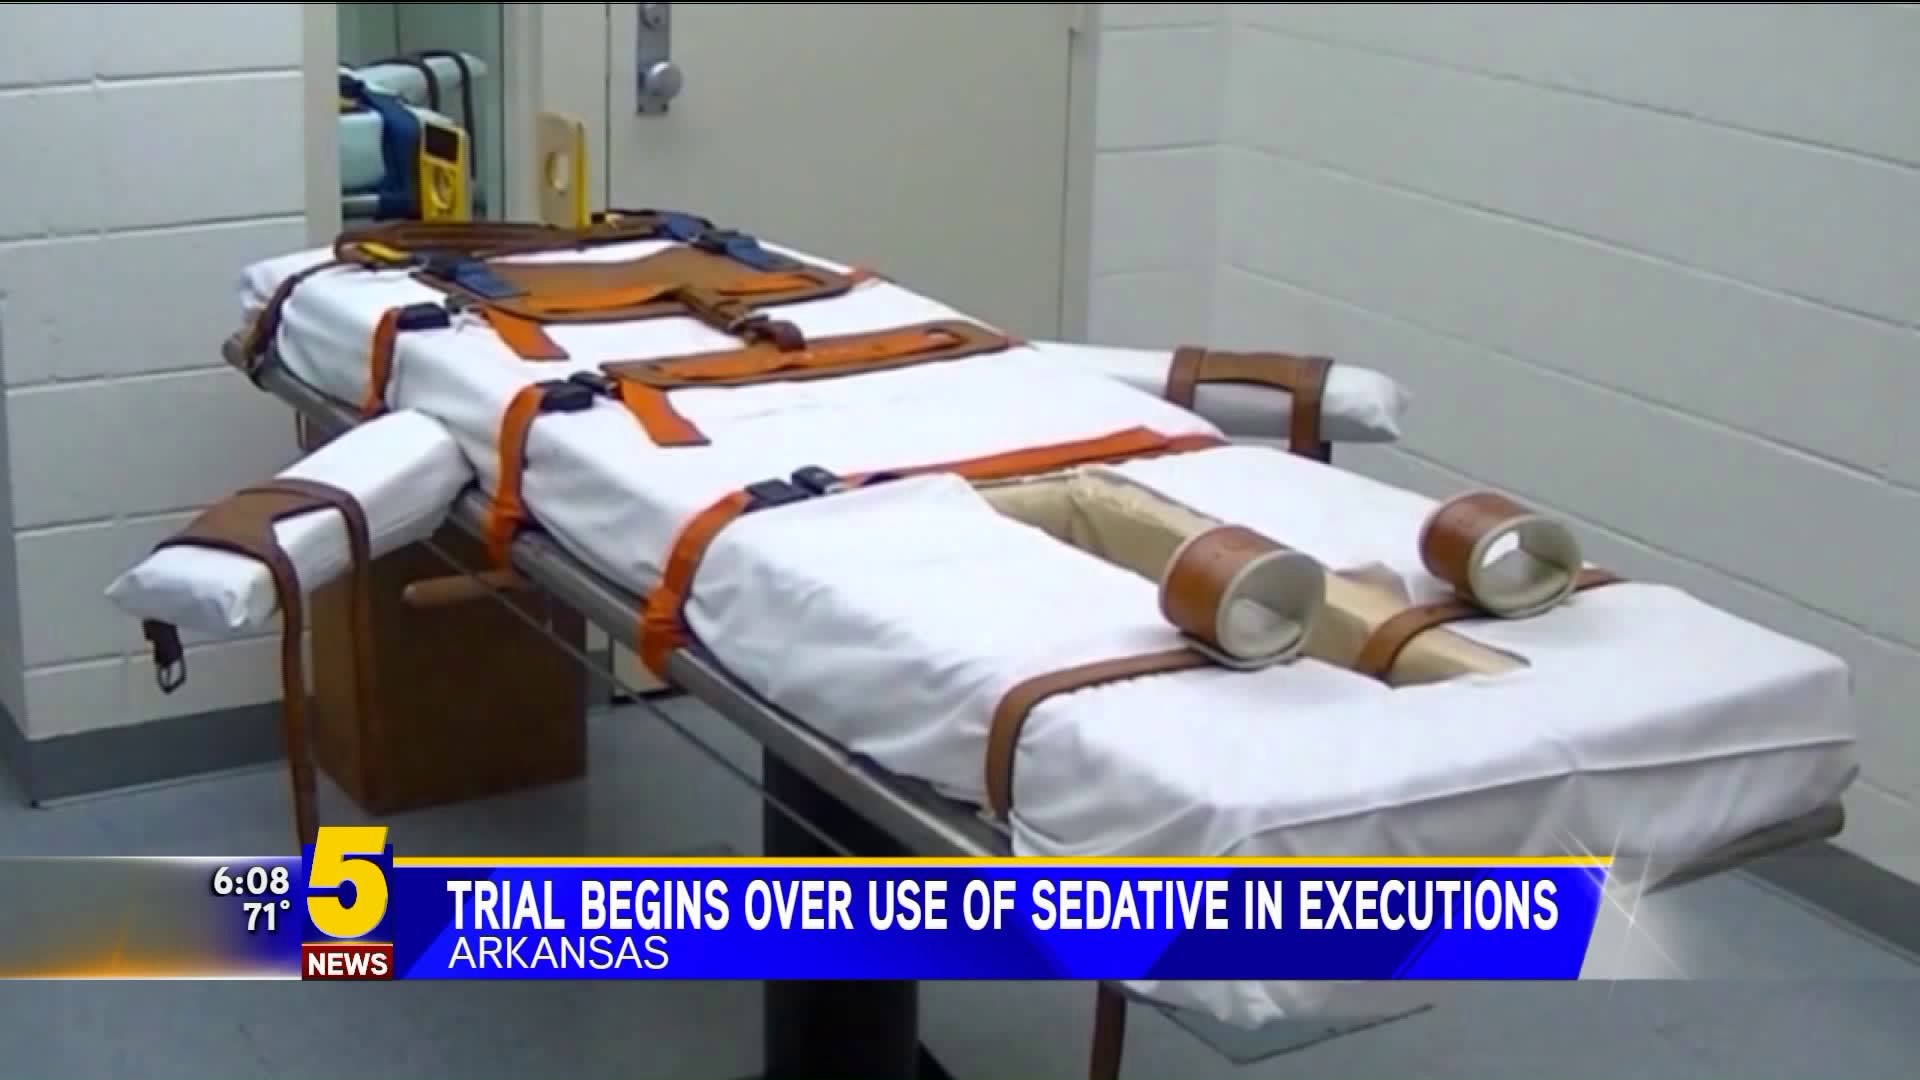 Trial Begins Over Use of Sedative in Executions